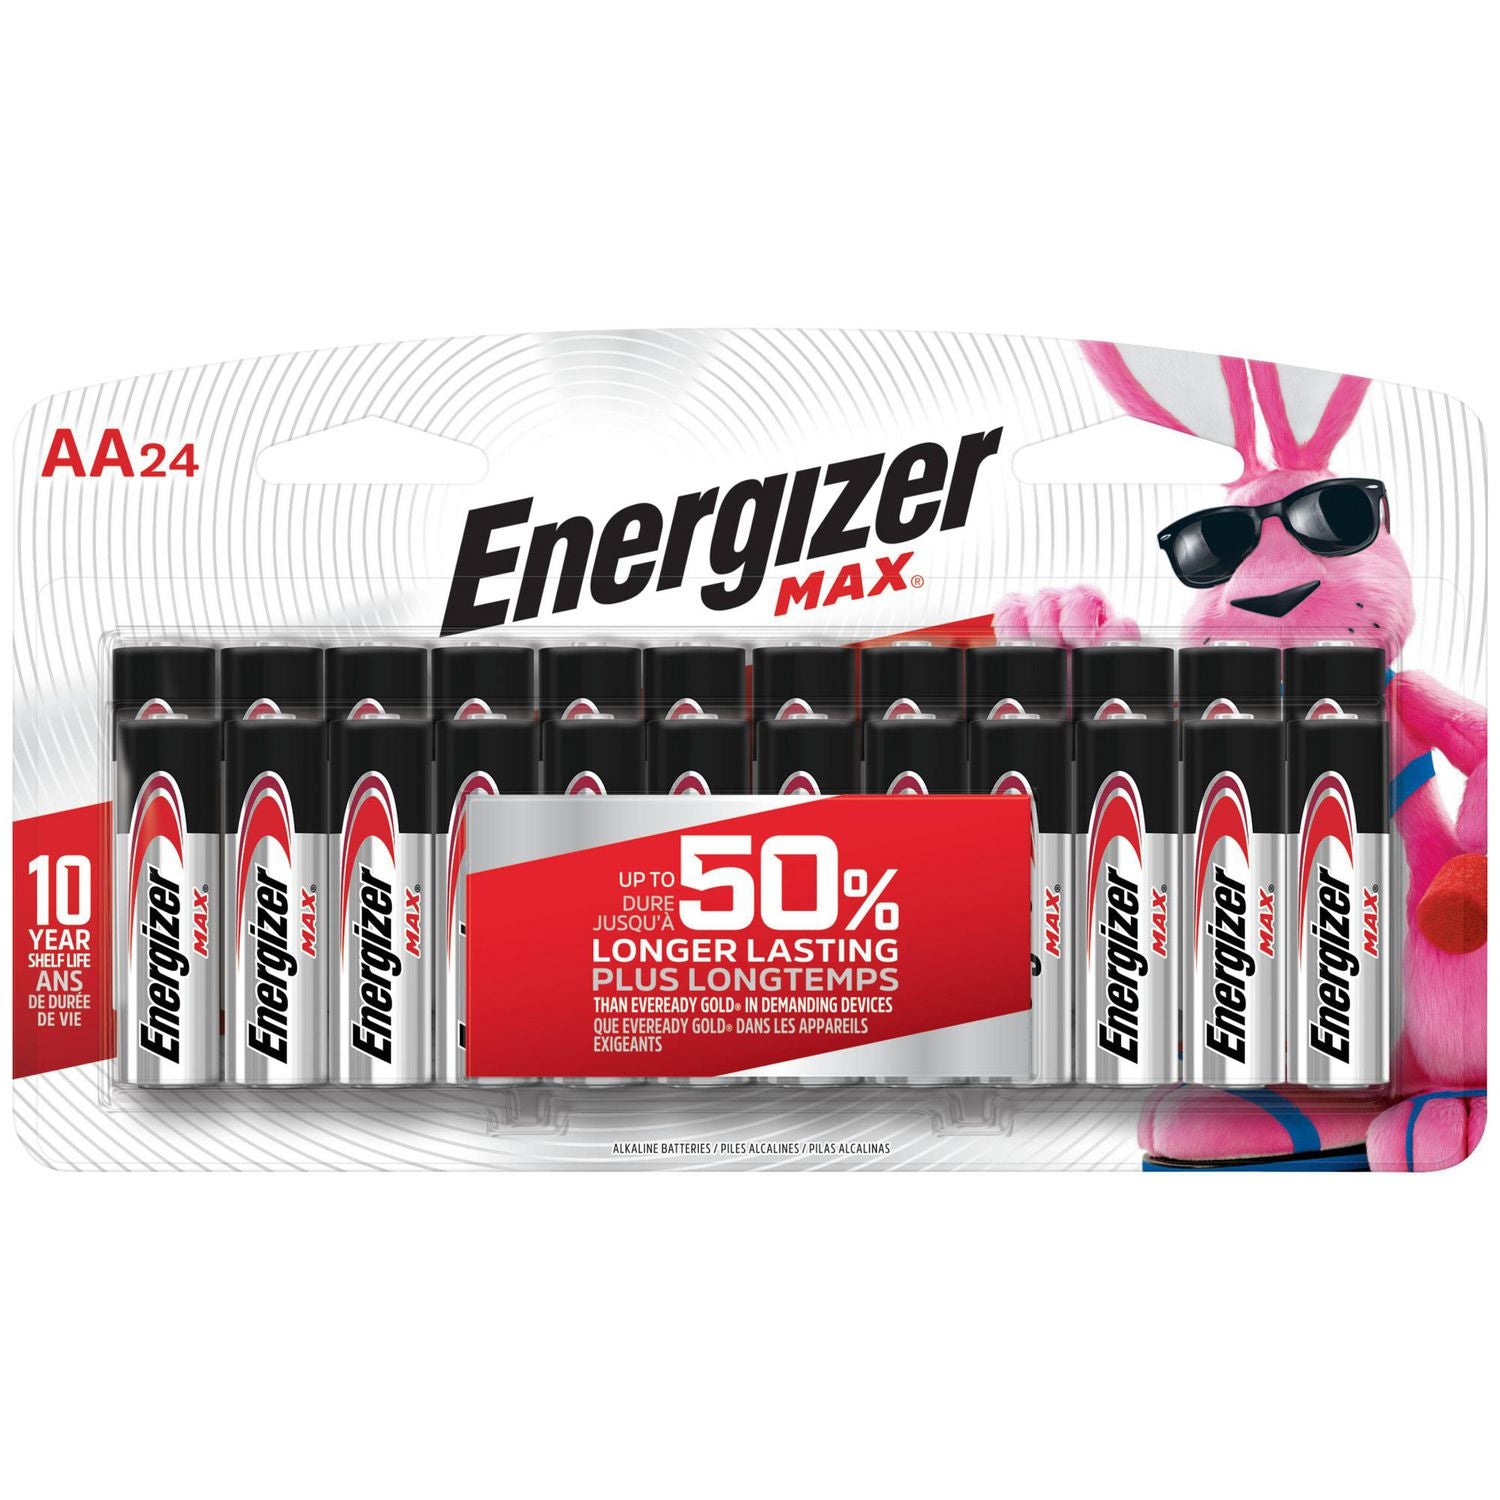 Energizer Max AA Batteries 24ct